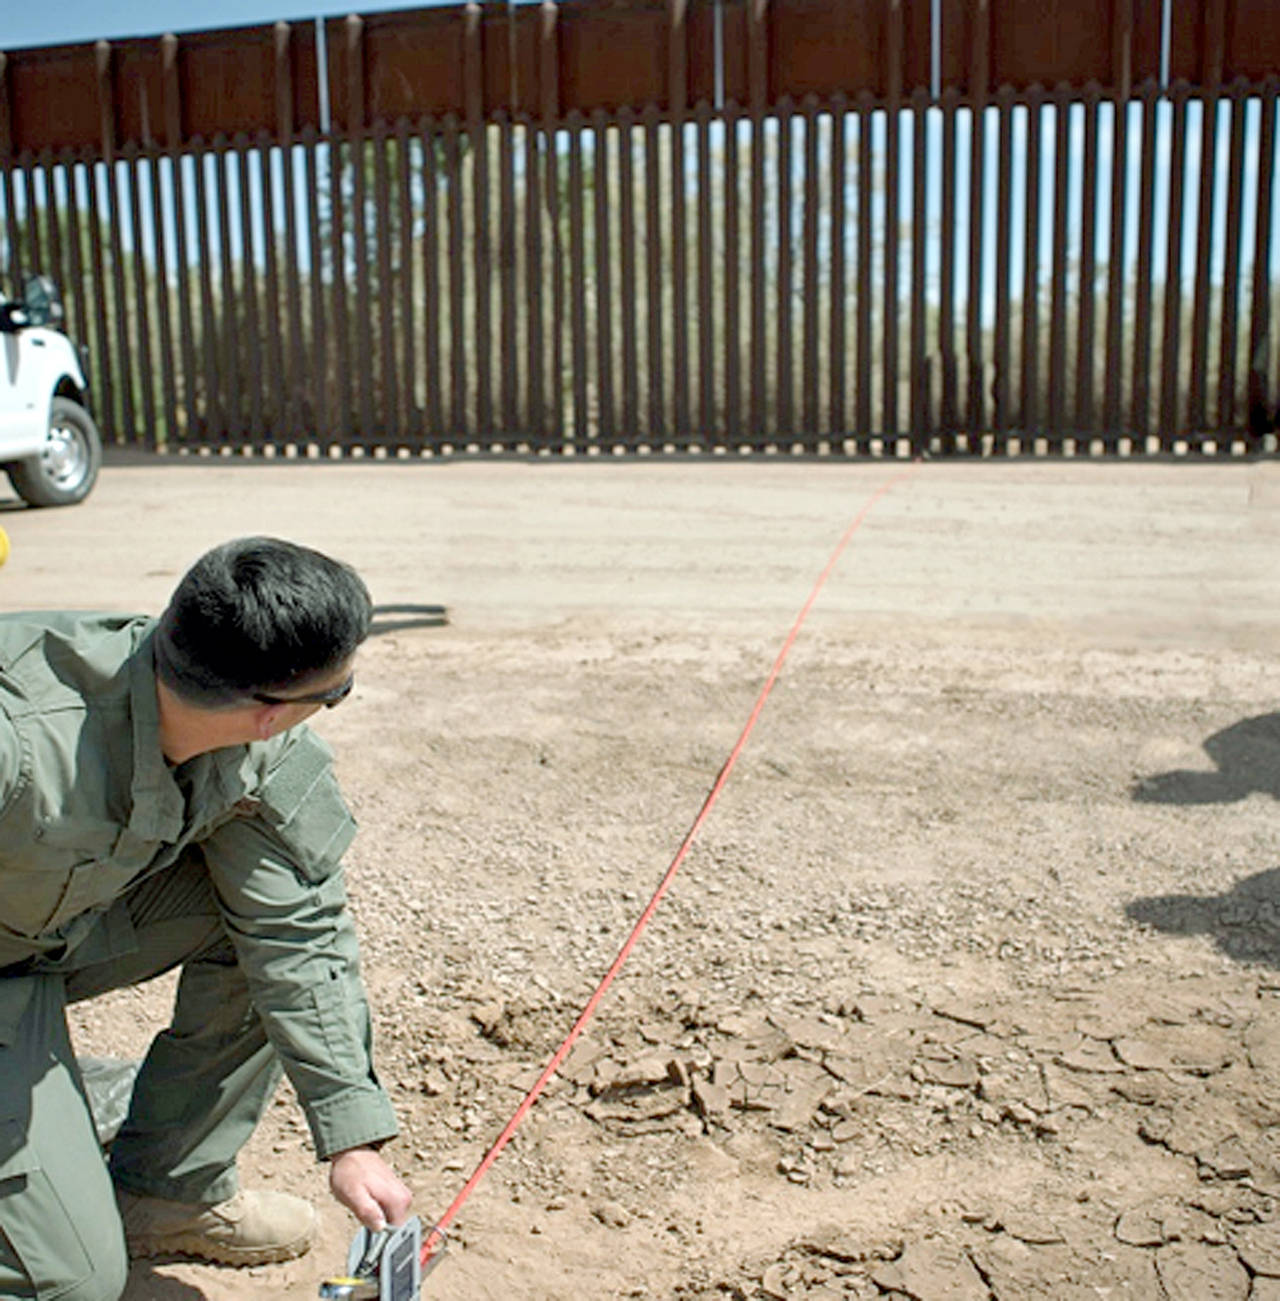 A Border Patrol agent shows the path of a tunnel that crosses the U.S.-Mexico border near Calexico, California. (U.S. Customs and Border Protection via AP, file)